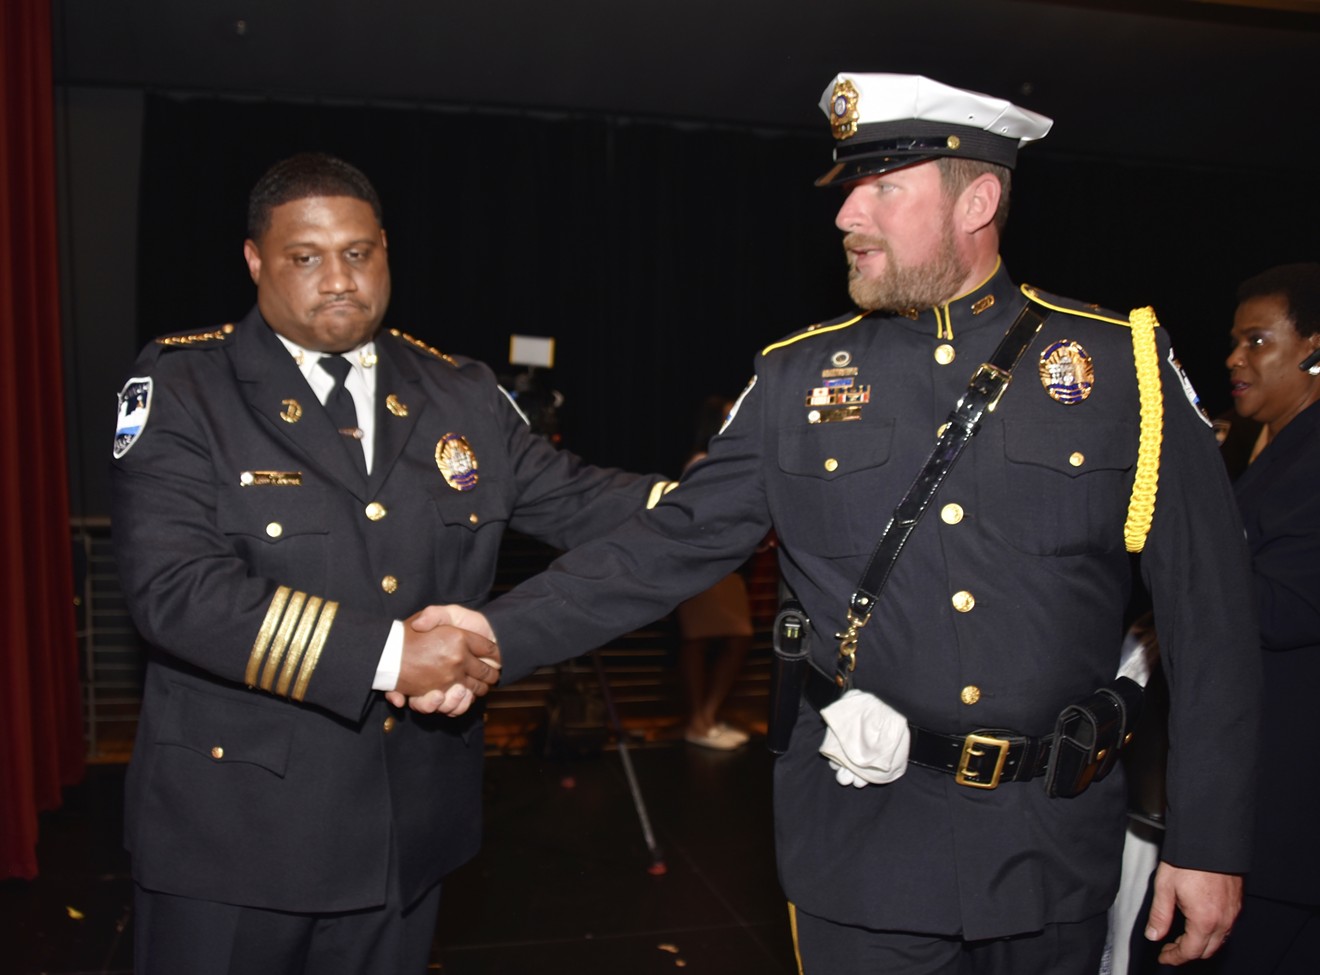 Savannah Police Department Swears In Police Chief Lenny Gunther